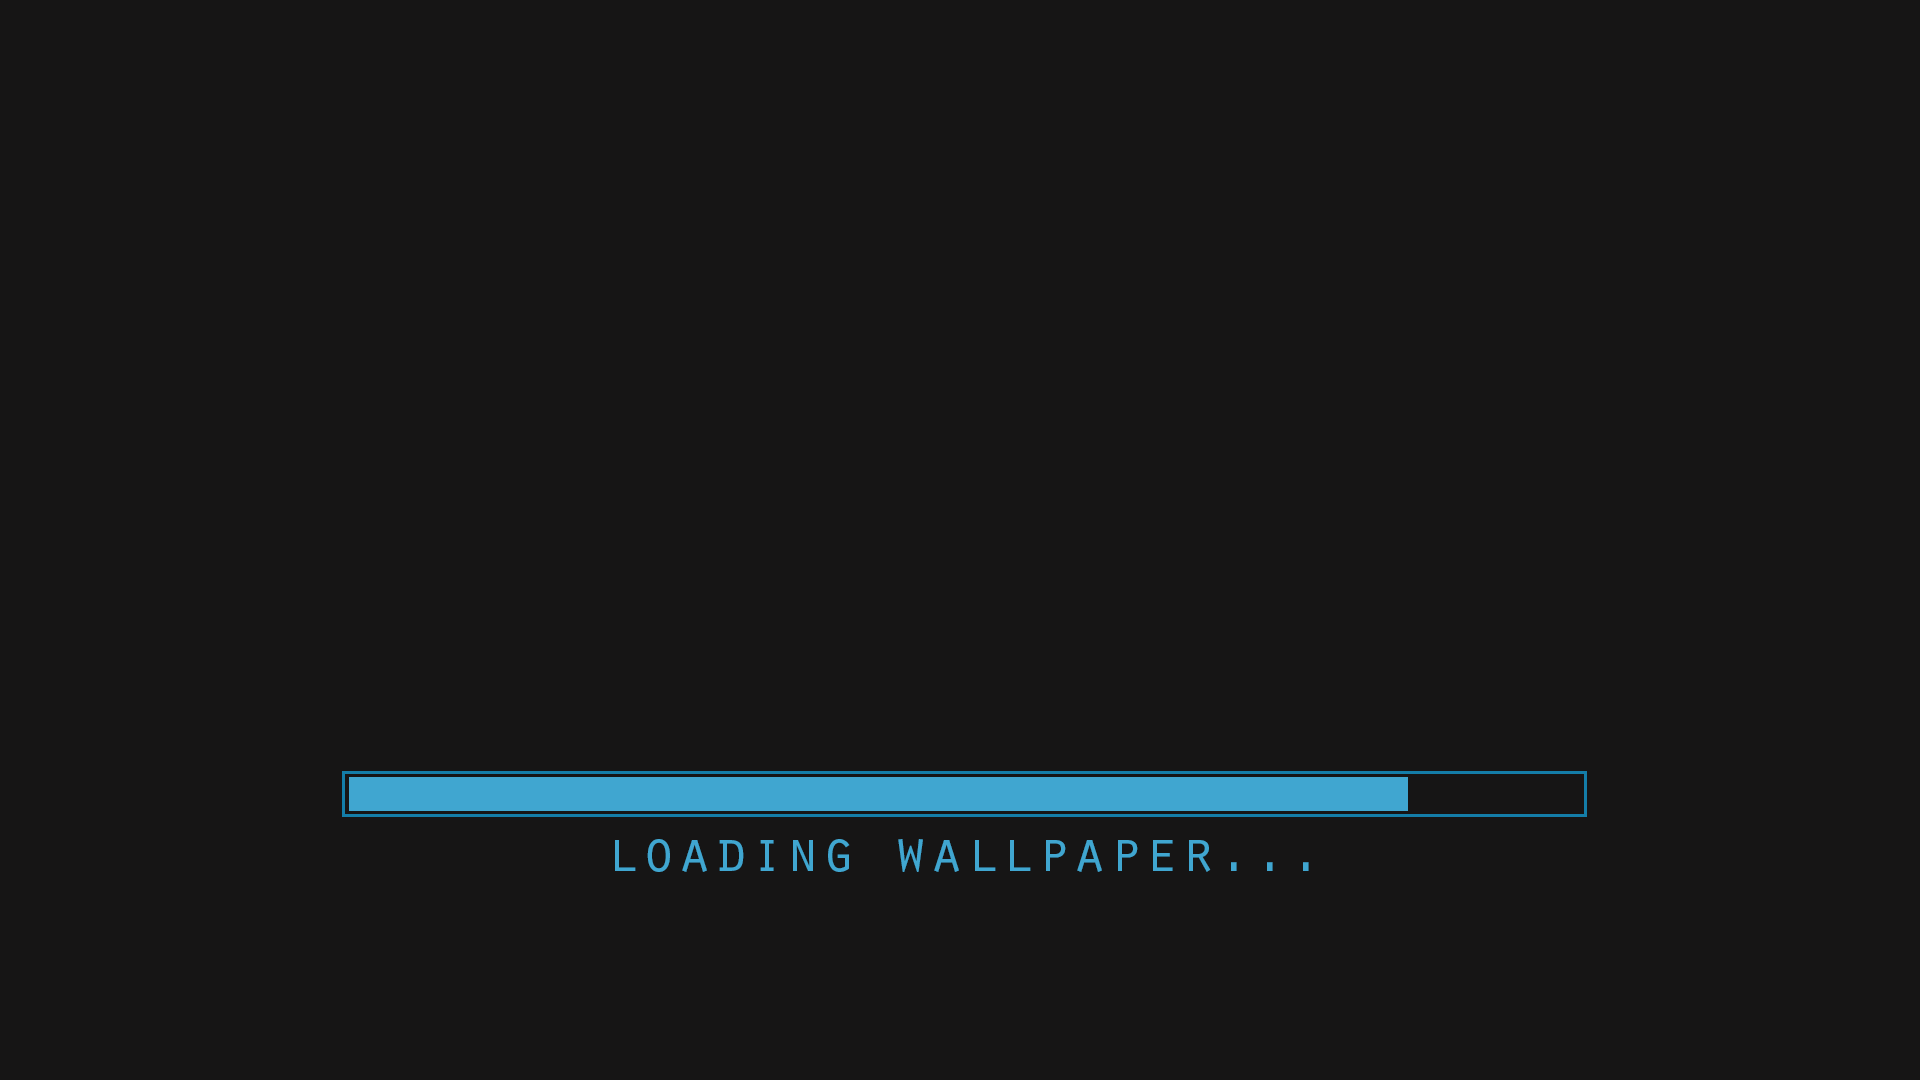 100+] Loading Wallpapers | Wallpapers.com